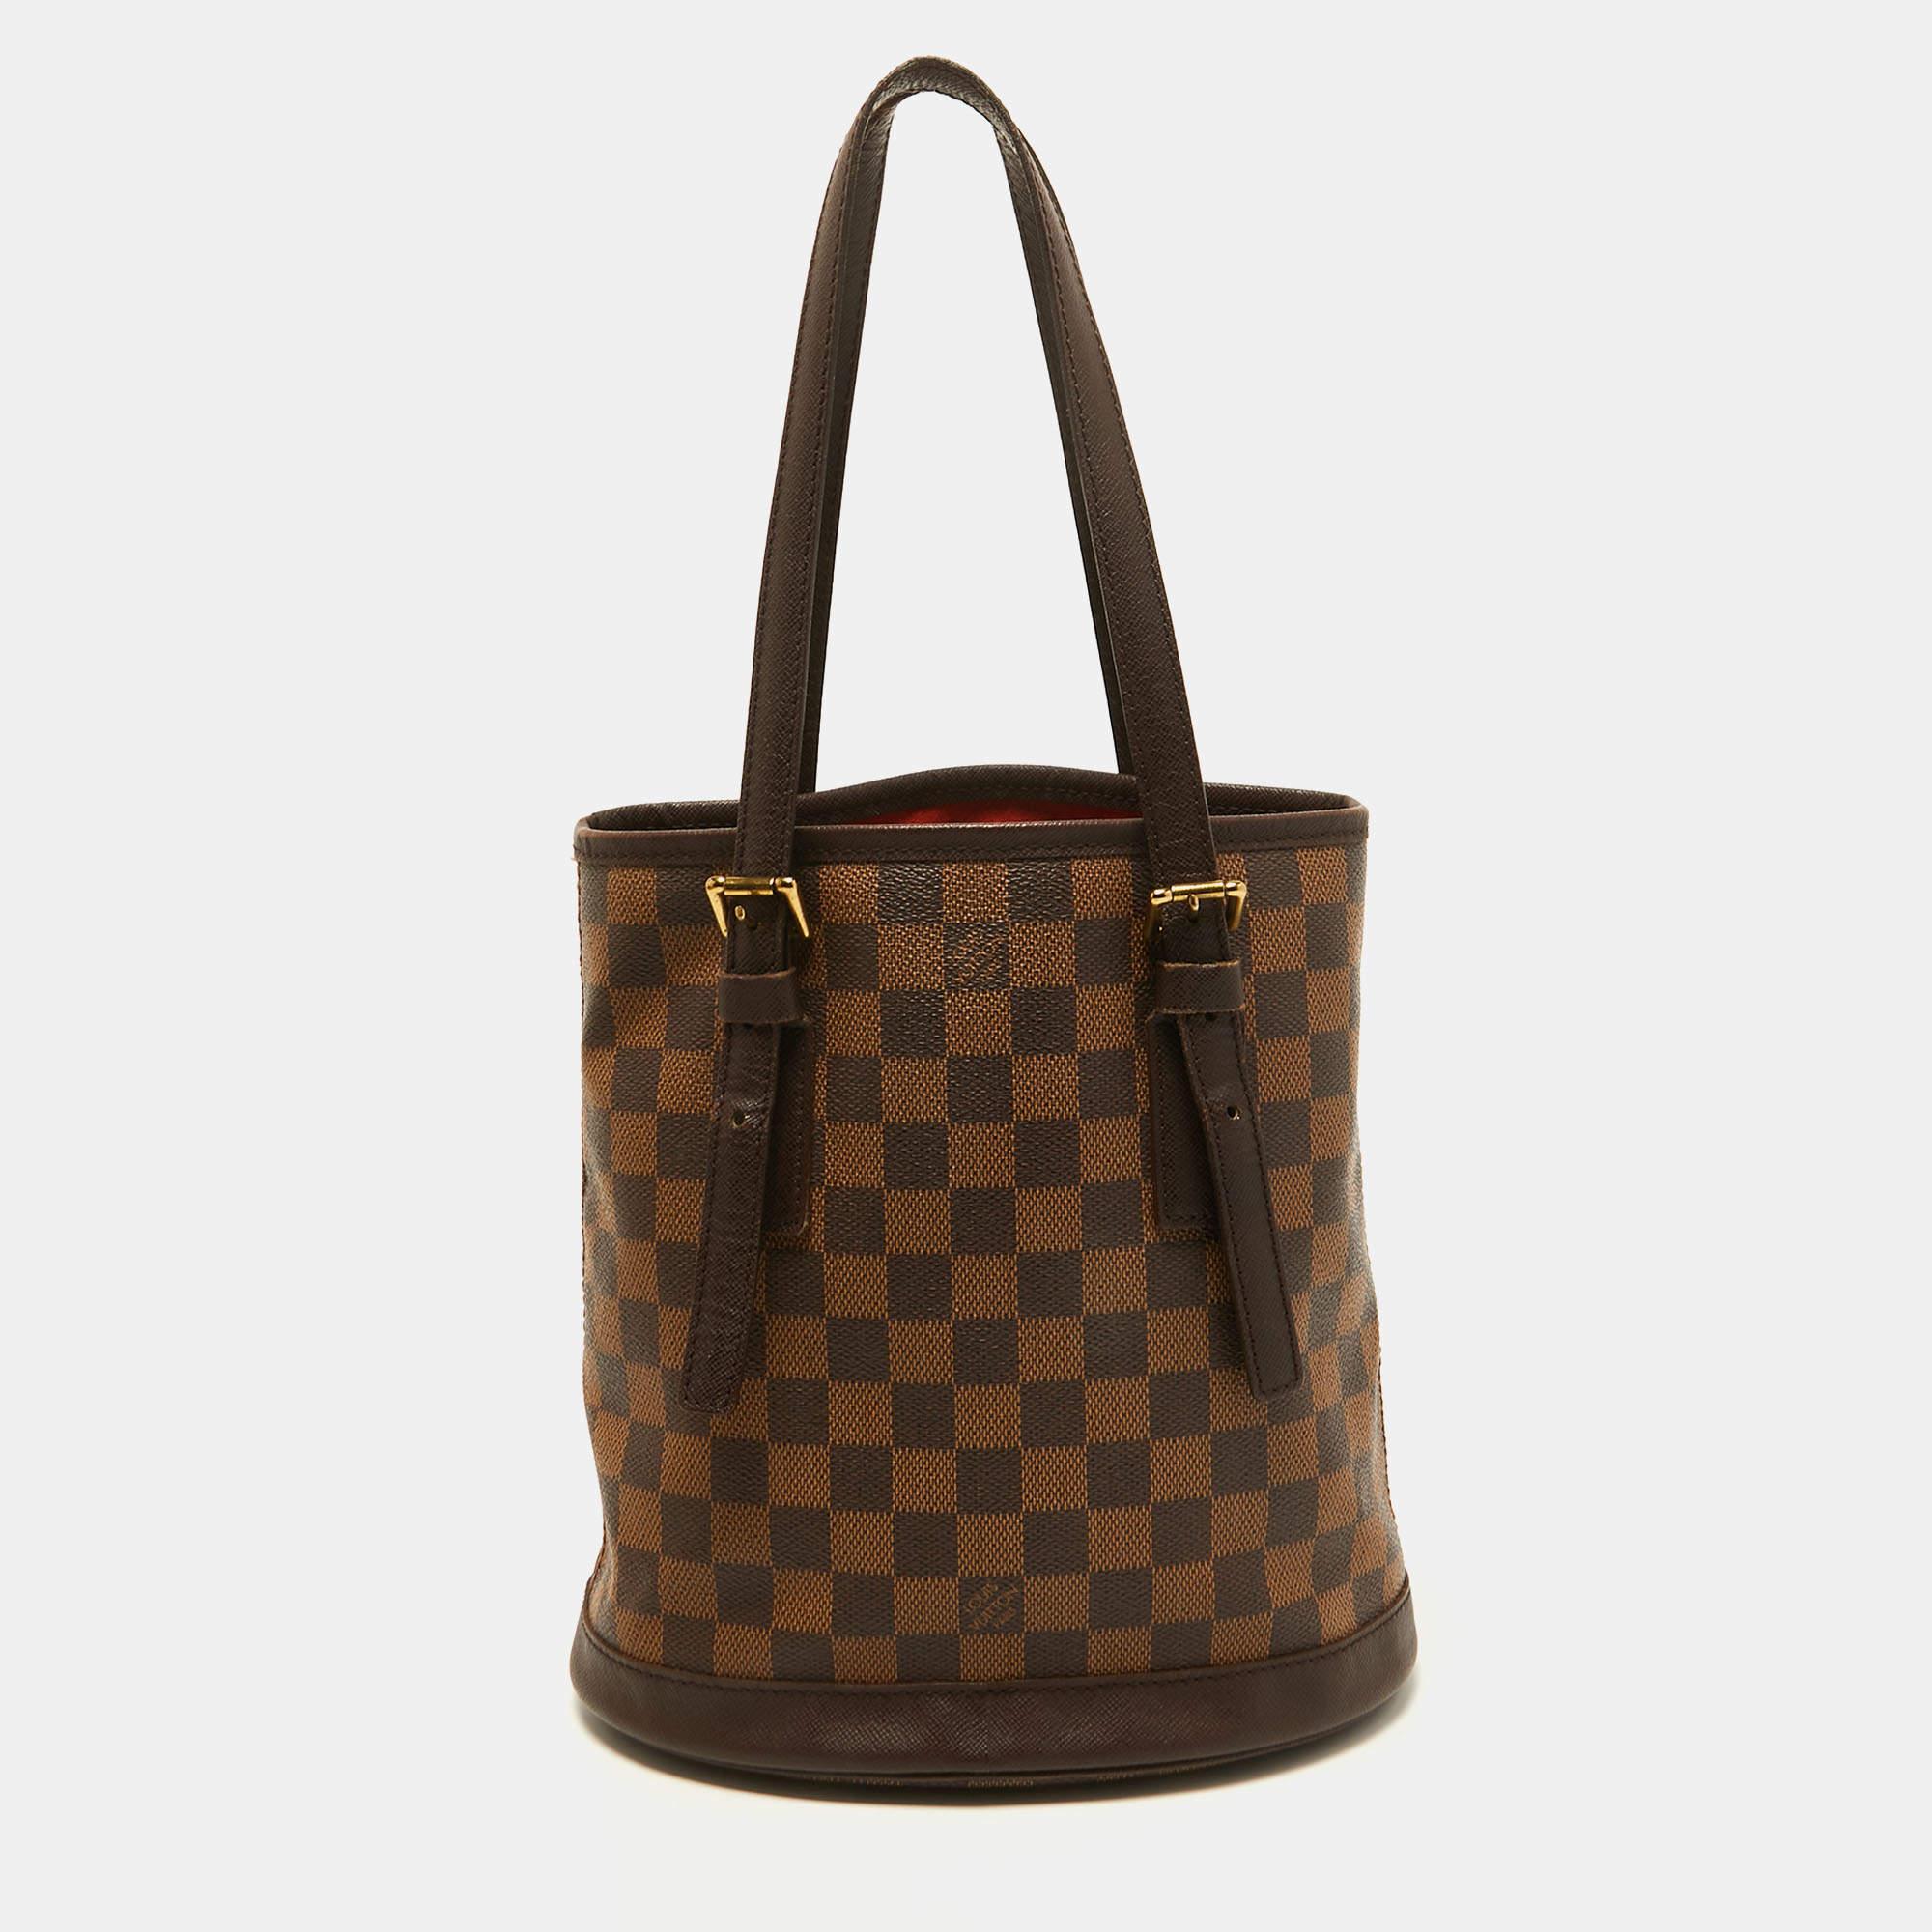 Named after the historic Le Marais district in Paris, the Marais bag is a classic design from the house of Louis Vuitton. Exuding the label's rich craftsmanship and creativity, the bag is rendered in Damier Ebene canvas and features a beautiful